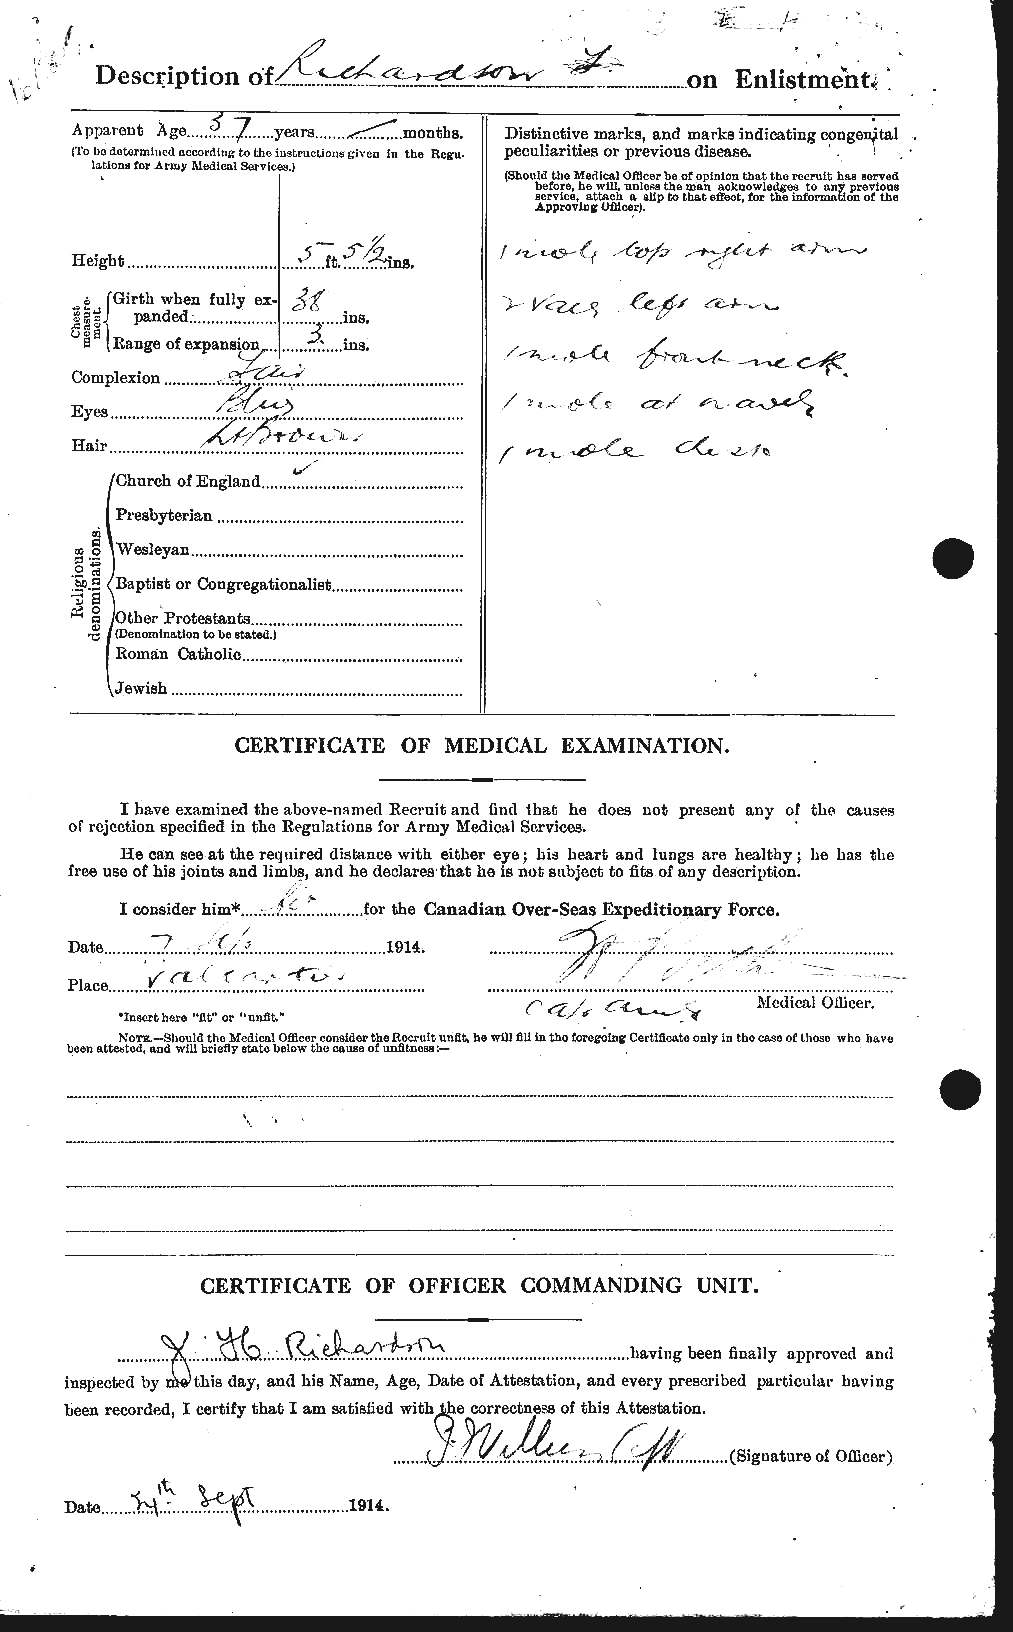 Personnel Records of the First World War - CEF 605061b